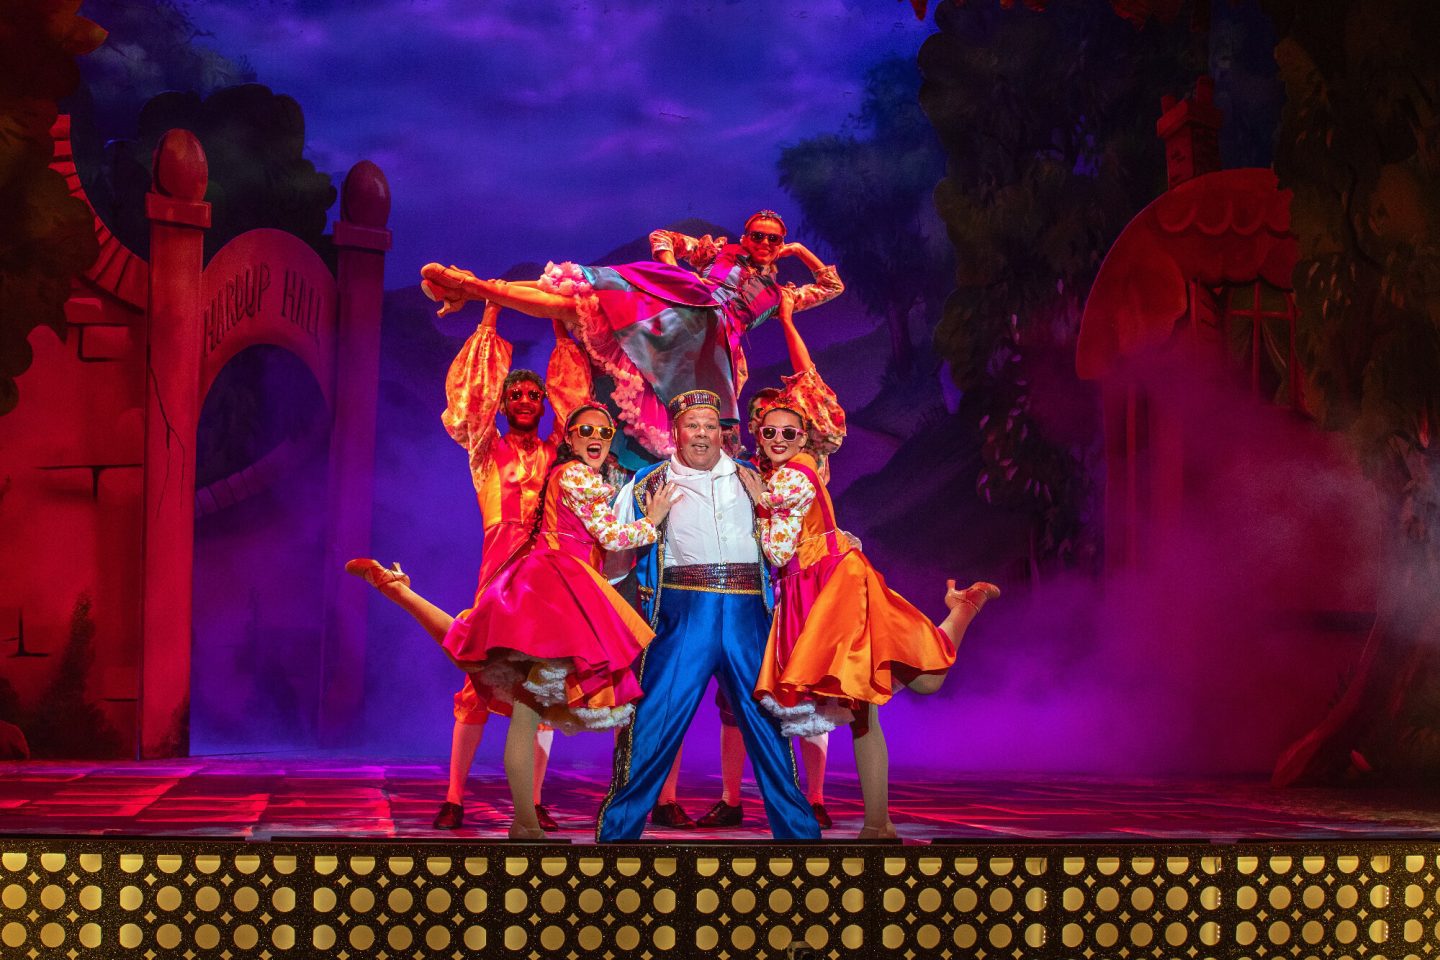 Mark James on stage with other cast members in Cinderella at Malvern Theatres